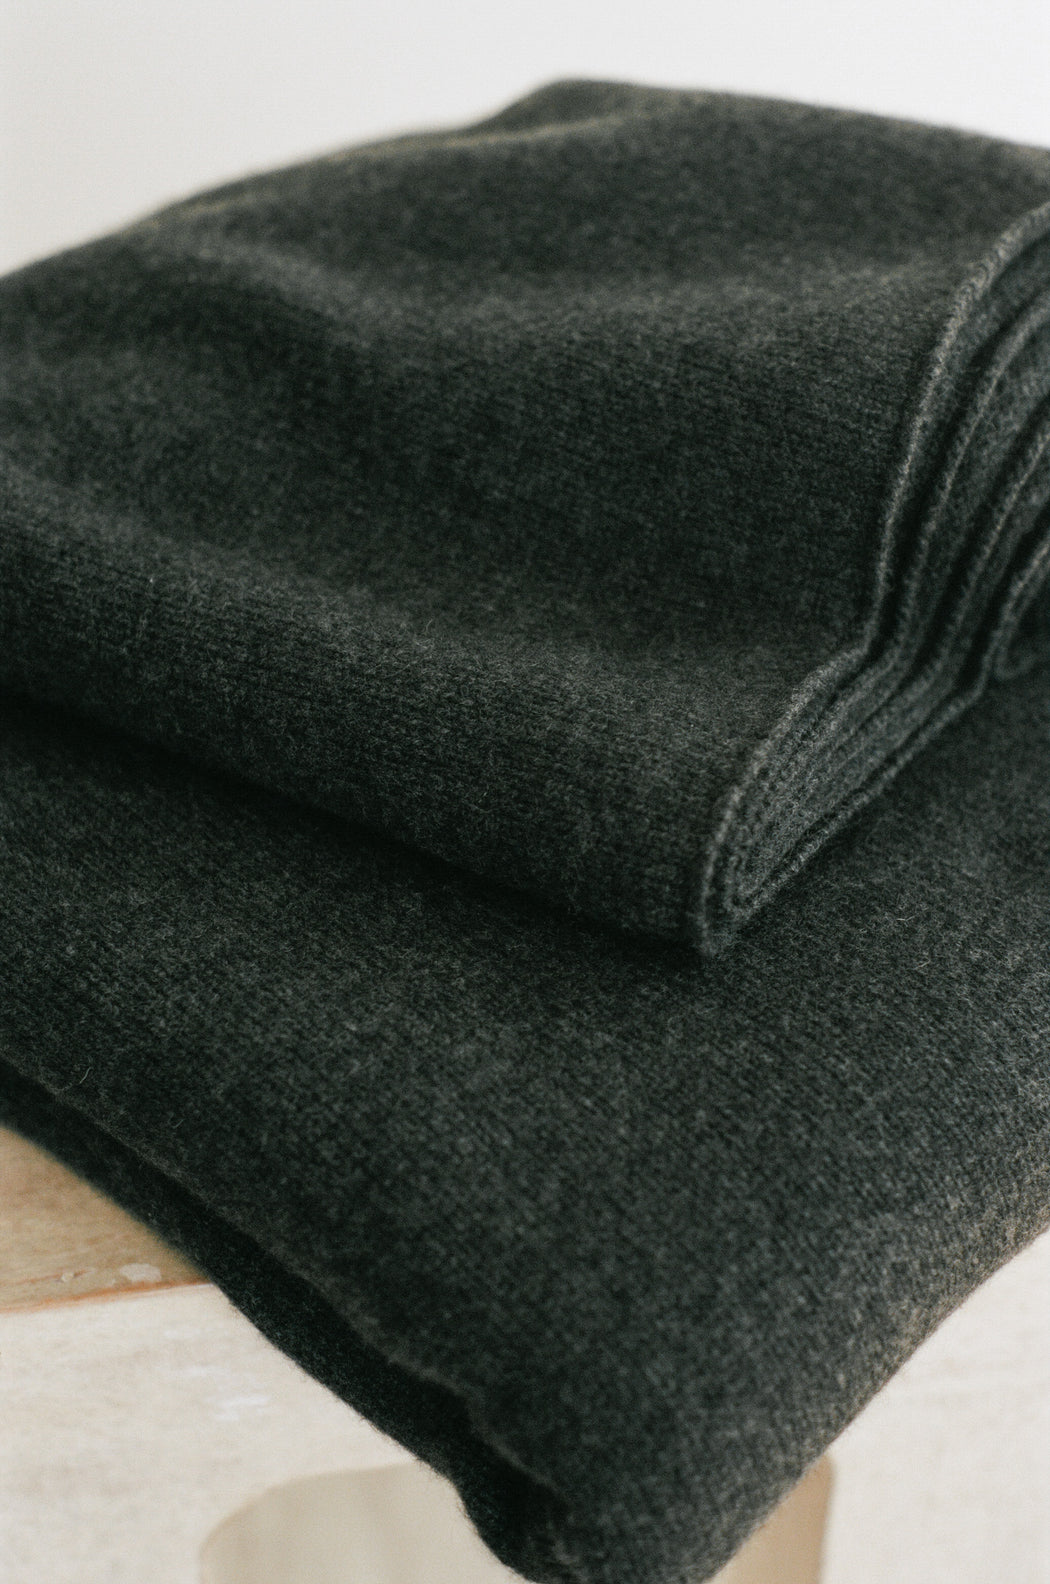 Oversized Italian Cashmere Jersey Knit Blanket - Soot